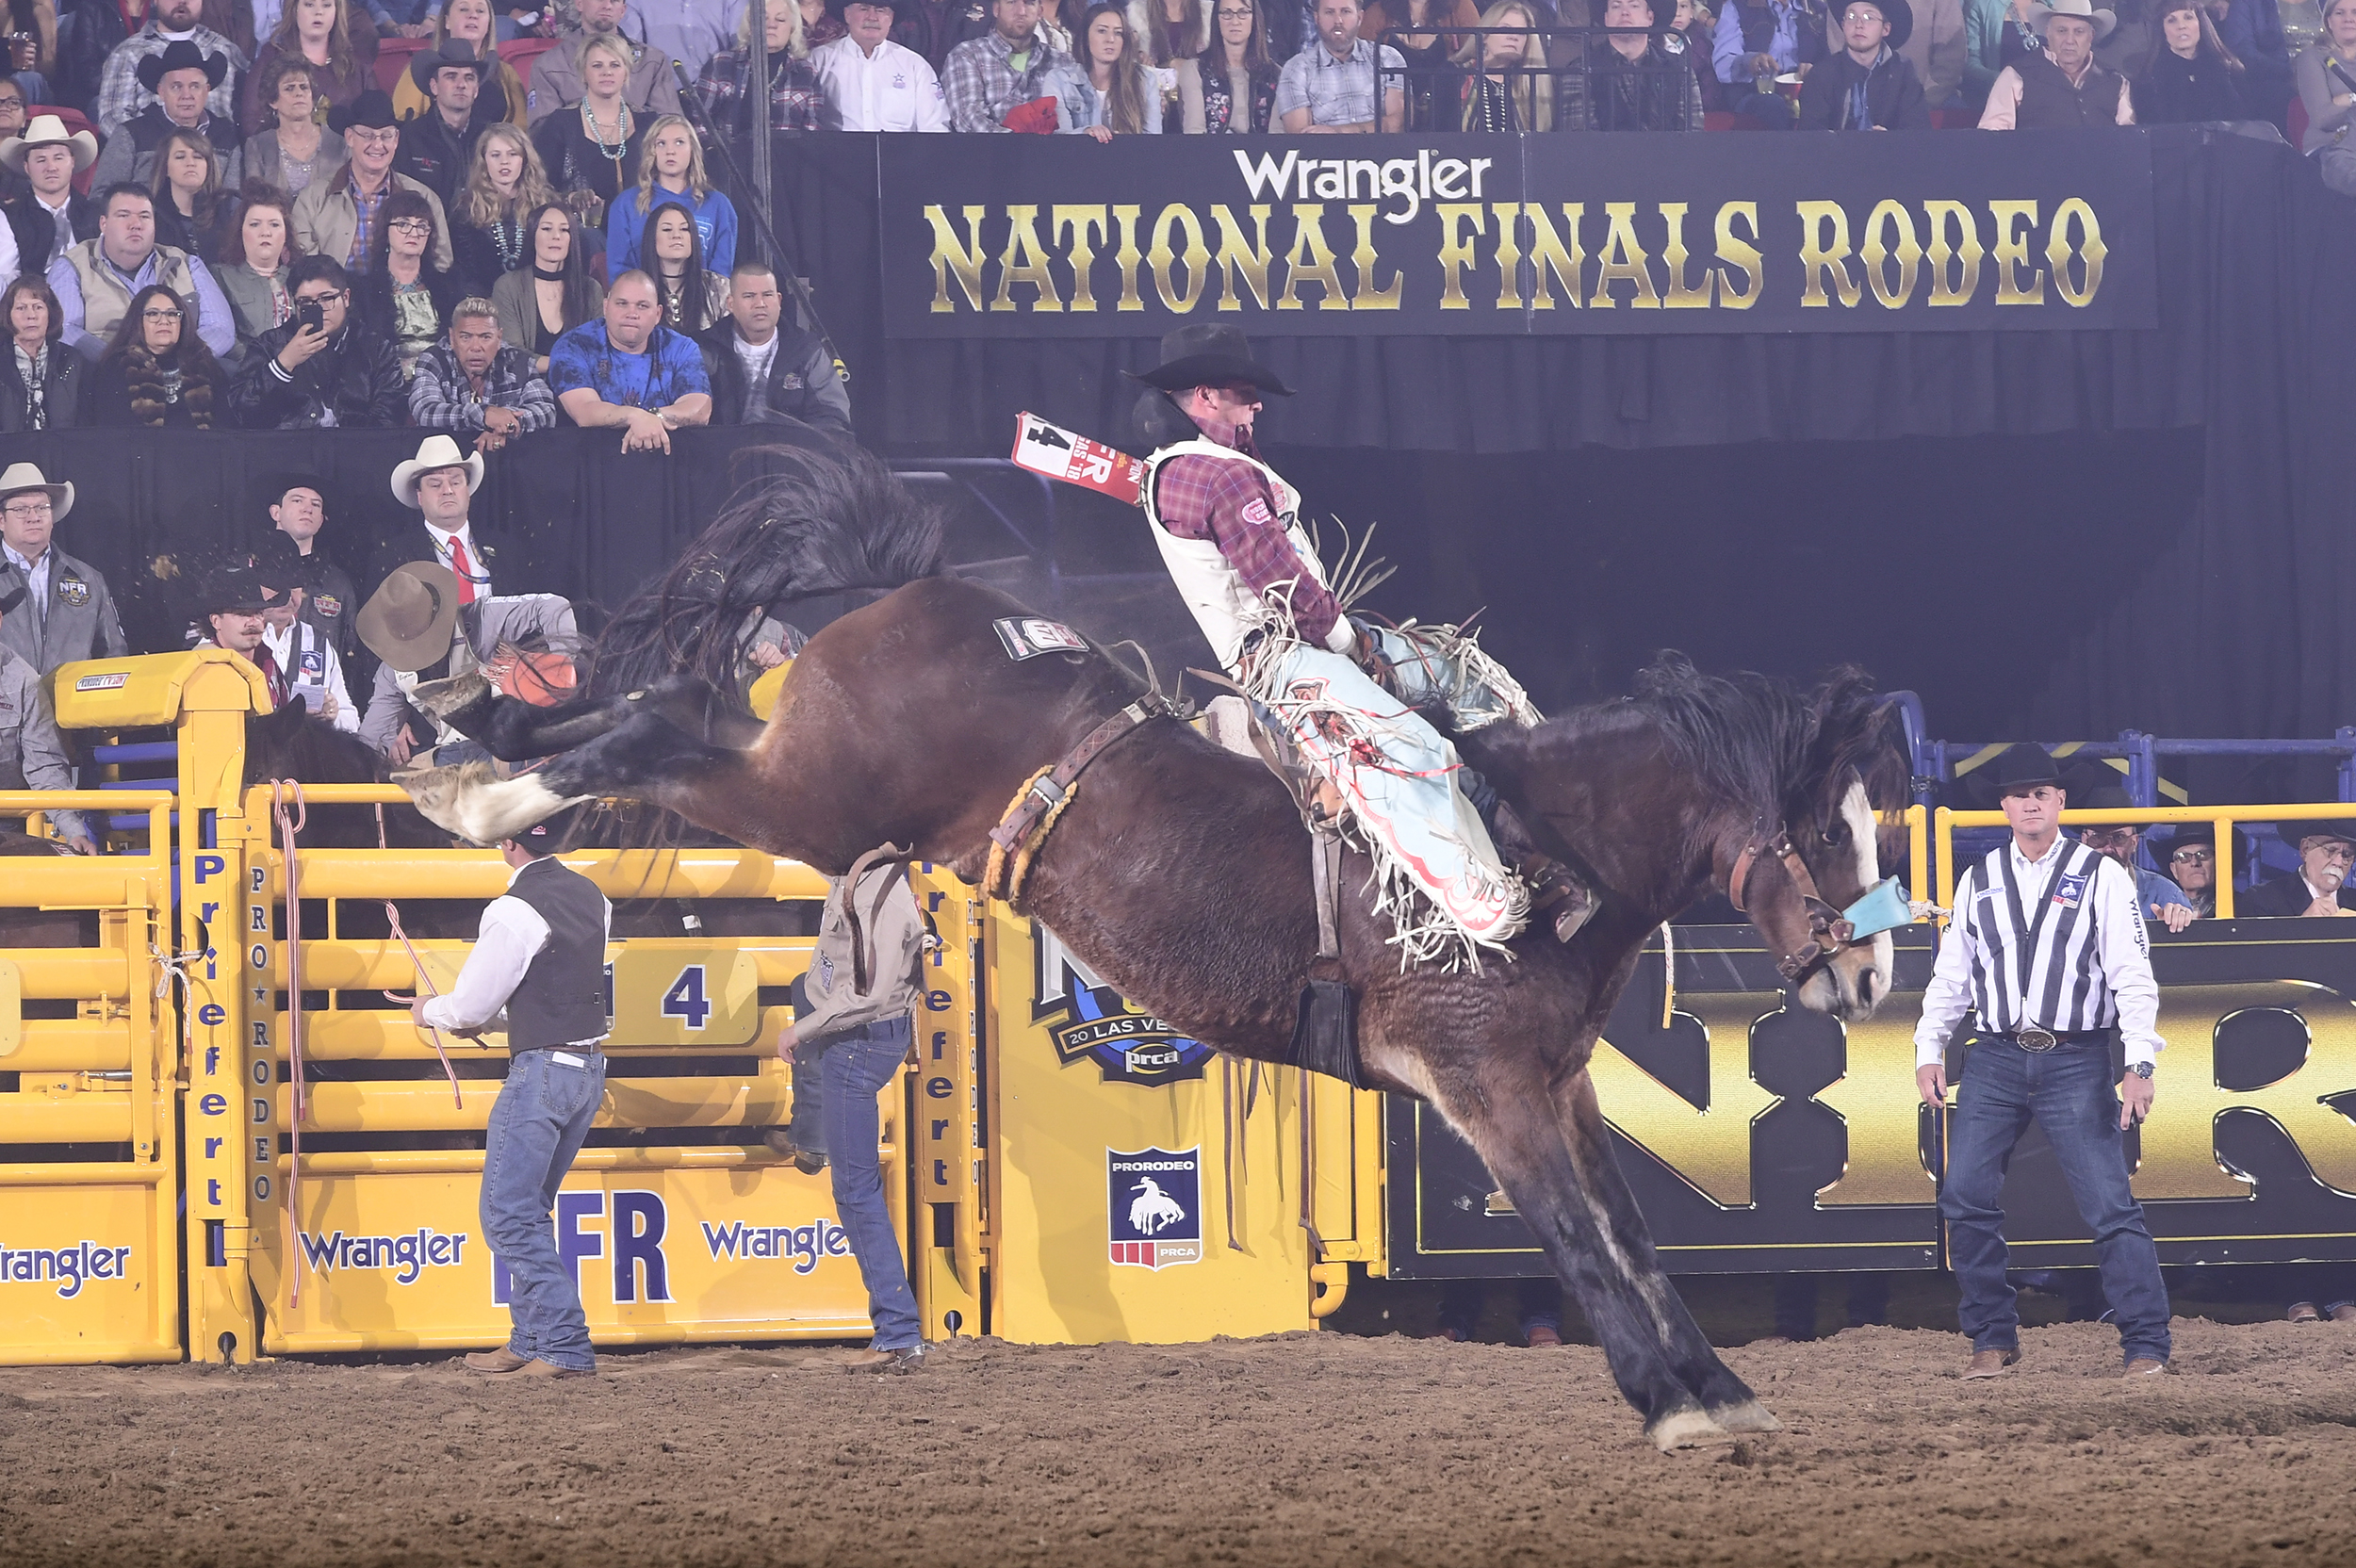 Richmond Champion finishes off the National Finals Rodeo by riding Pickett Pro Rodeo's Faded Night for 88.5 points to finish in a tie for second place in the 10th round. (PRCA PRORODEO PHOTO BY JAMES PHIFER)